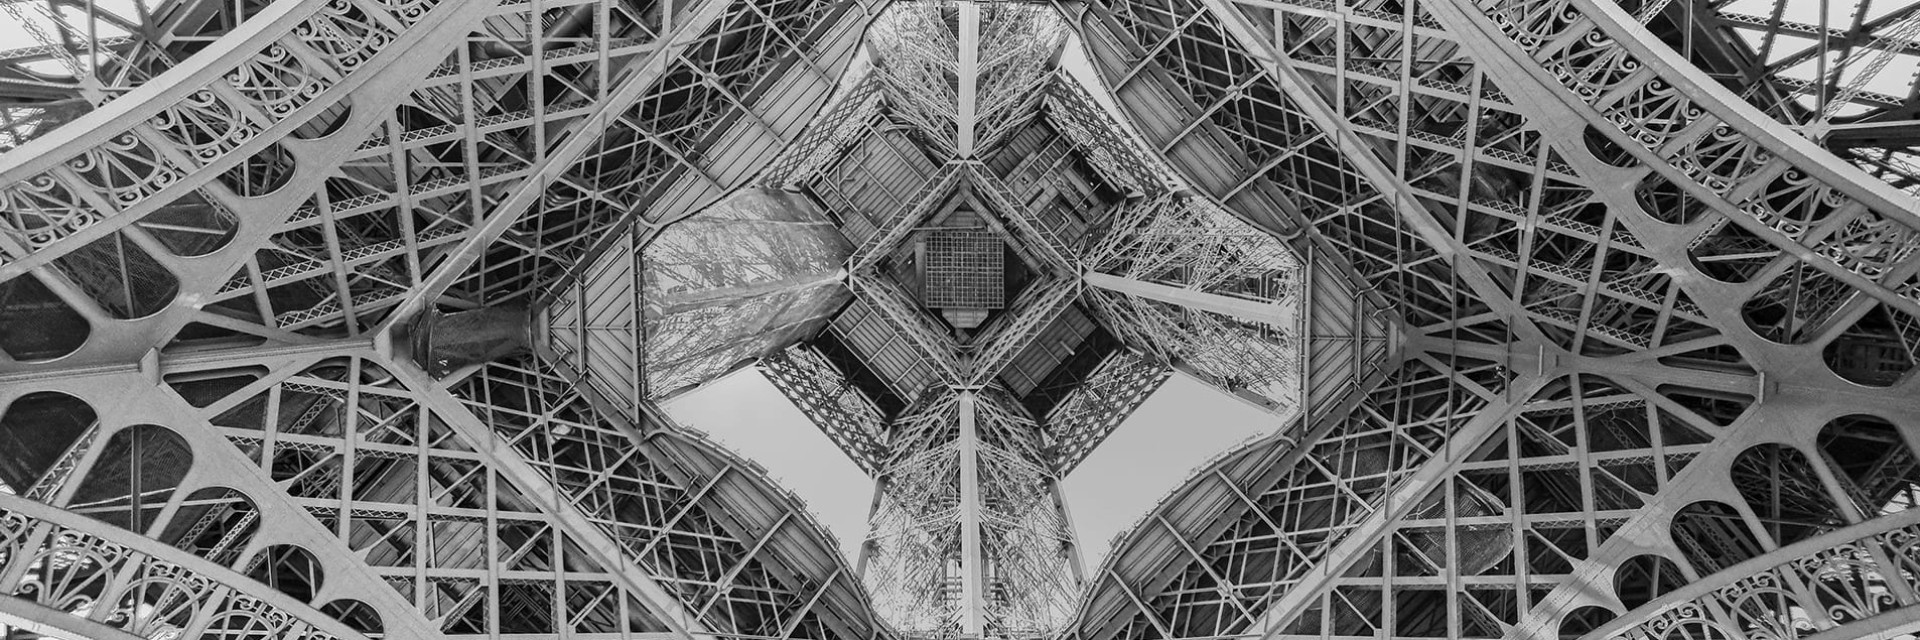 Eiffel Tower in Paris seen from below in illustration of the heritage of French know-how and innovation - History of the EuroCave factory in northern France